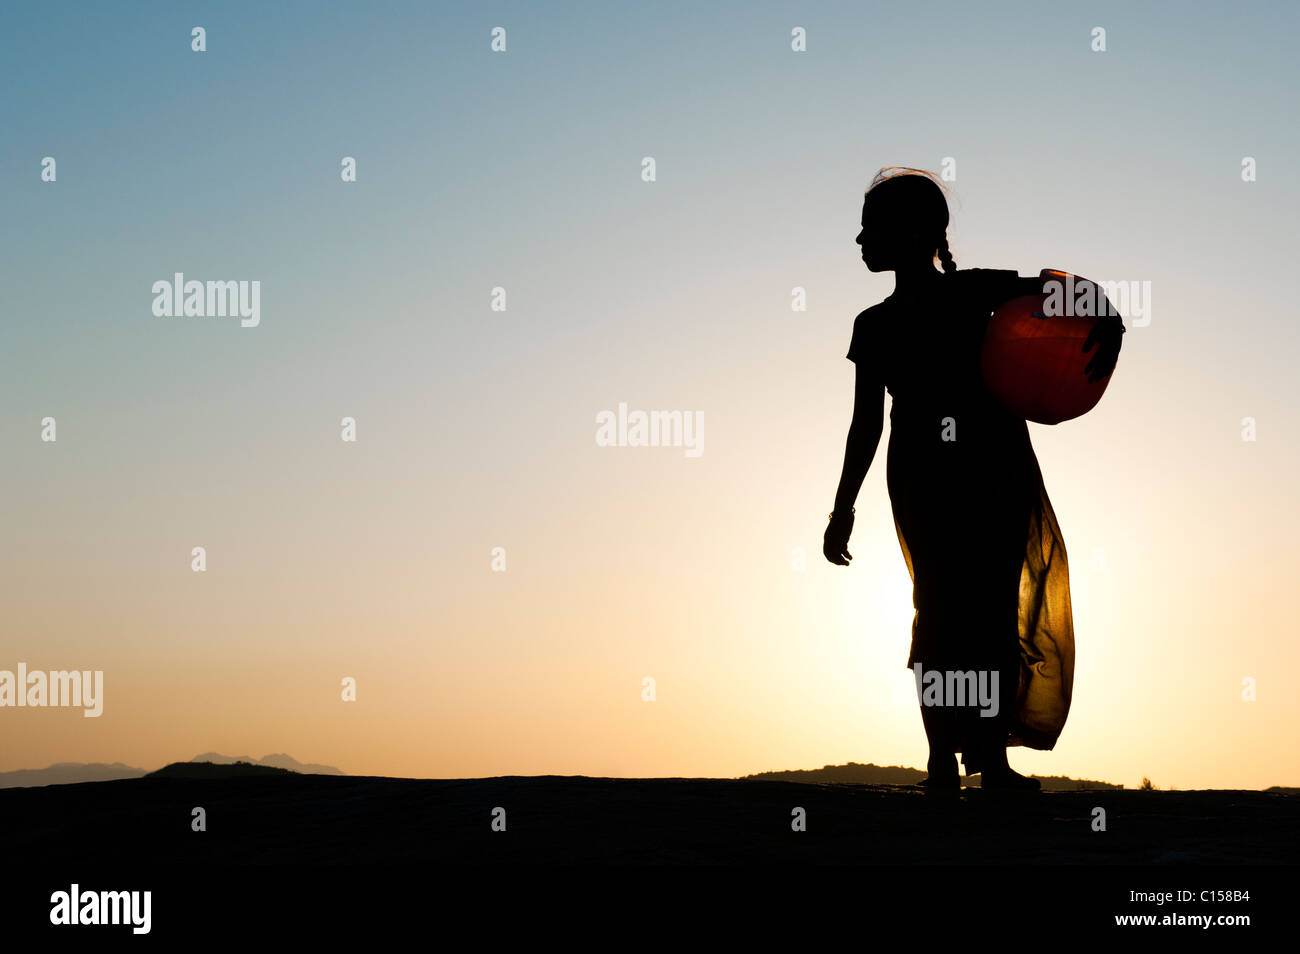 Rural Indian village girl carrying a water pot at sunset. Silhouette. Andhra Pradesh, India Stock Photo